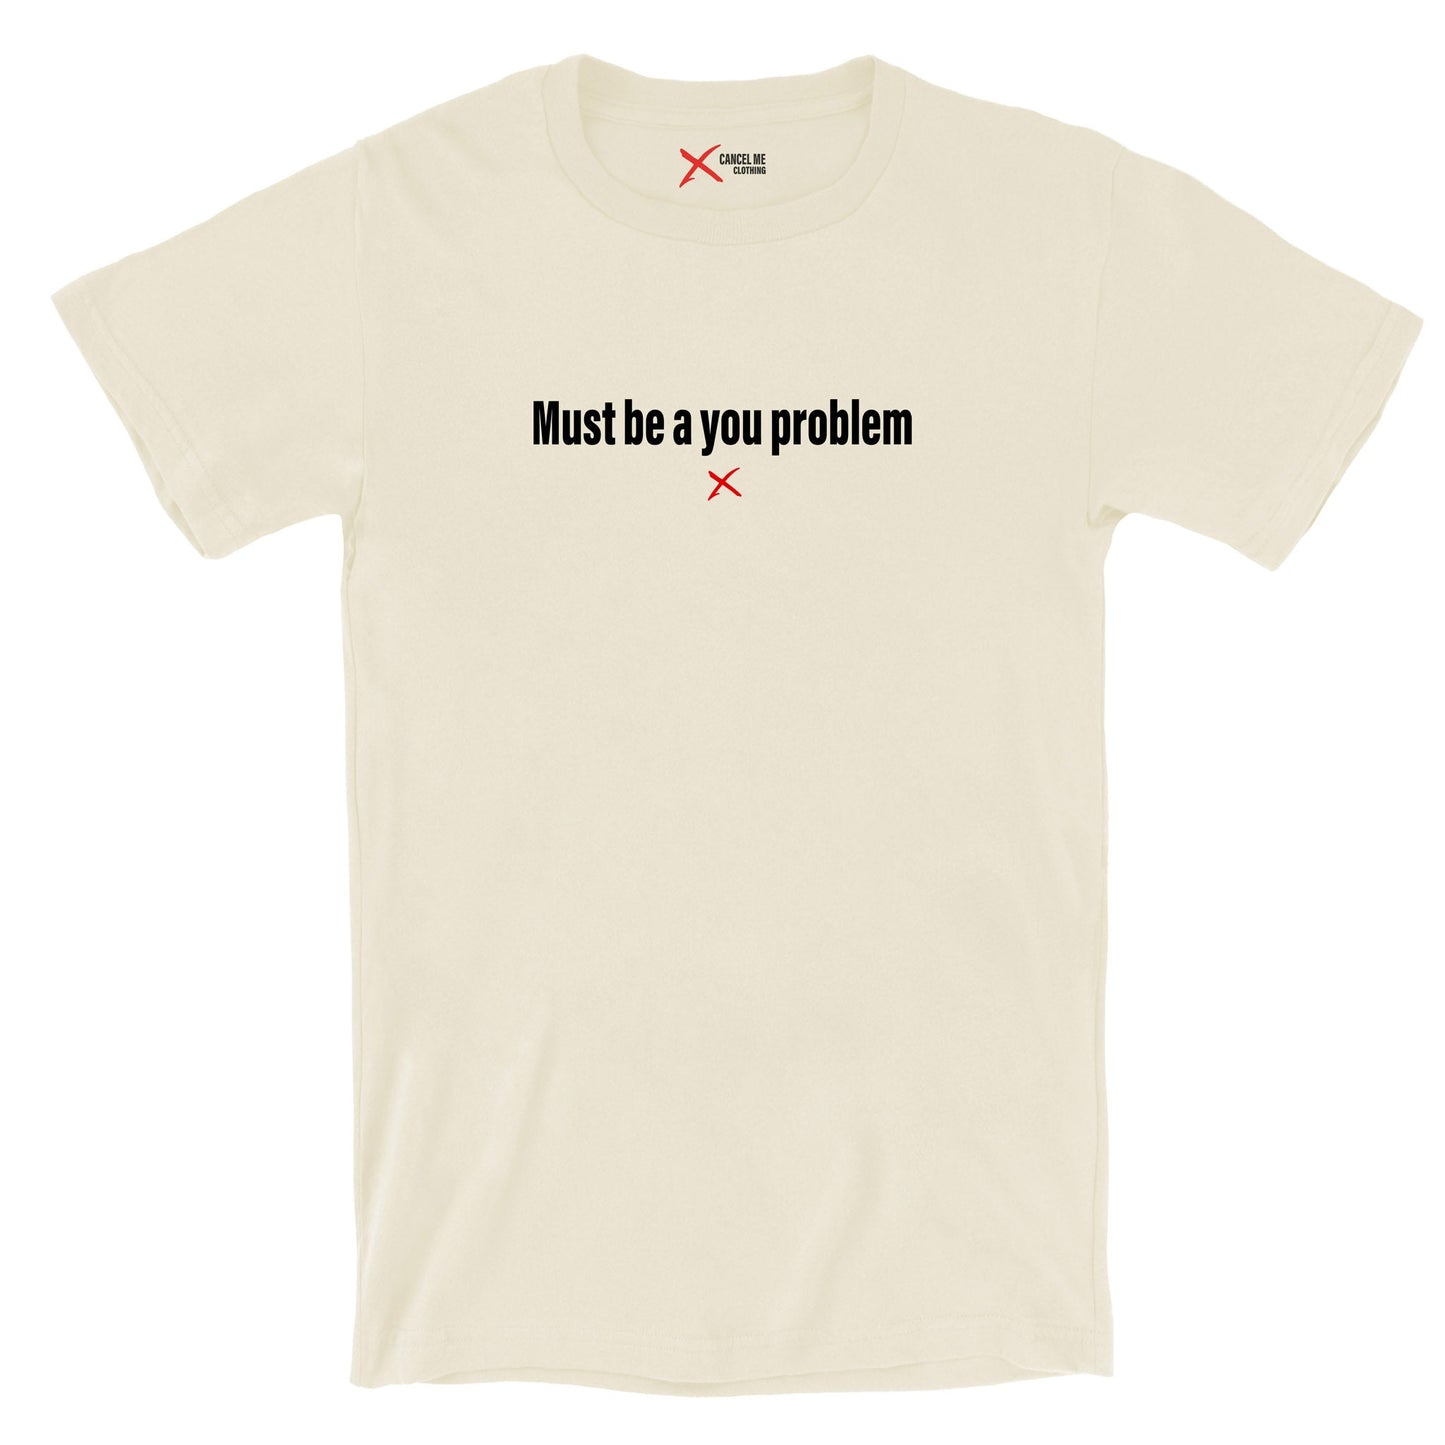 Must be a you problem - Shirt